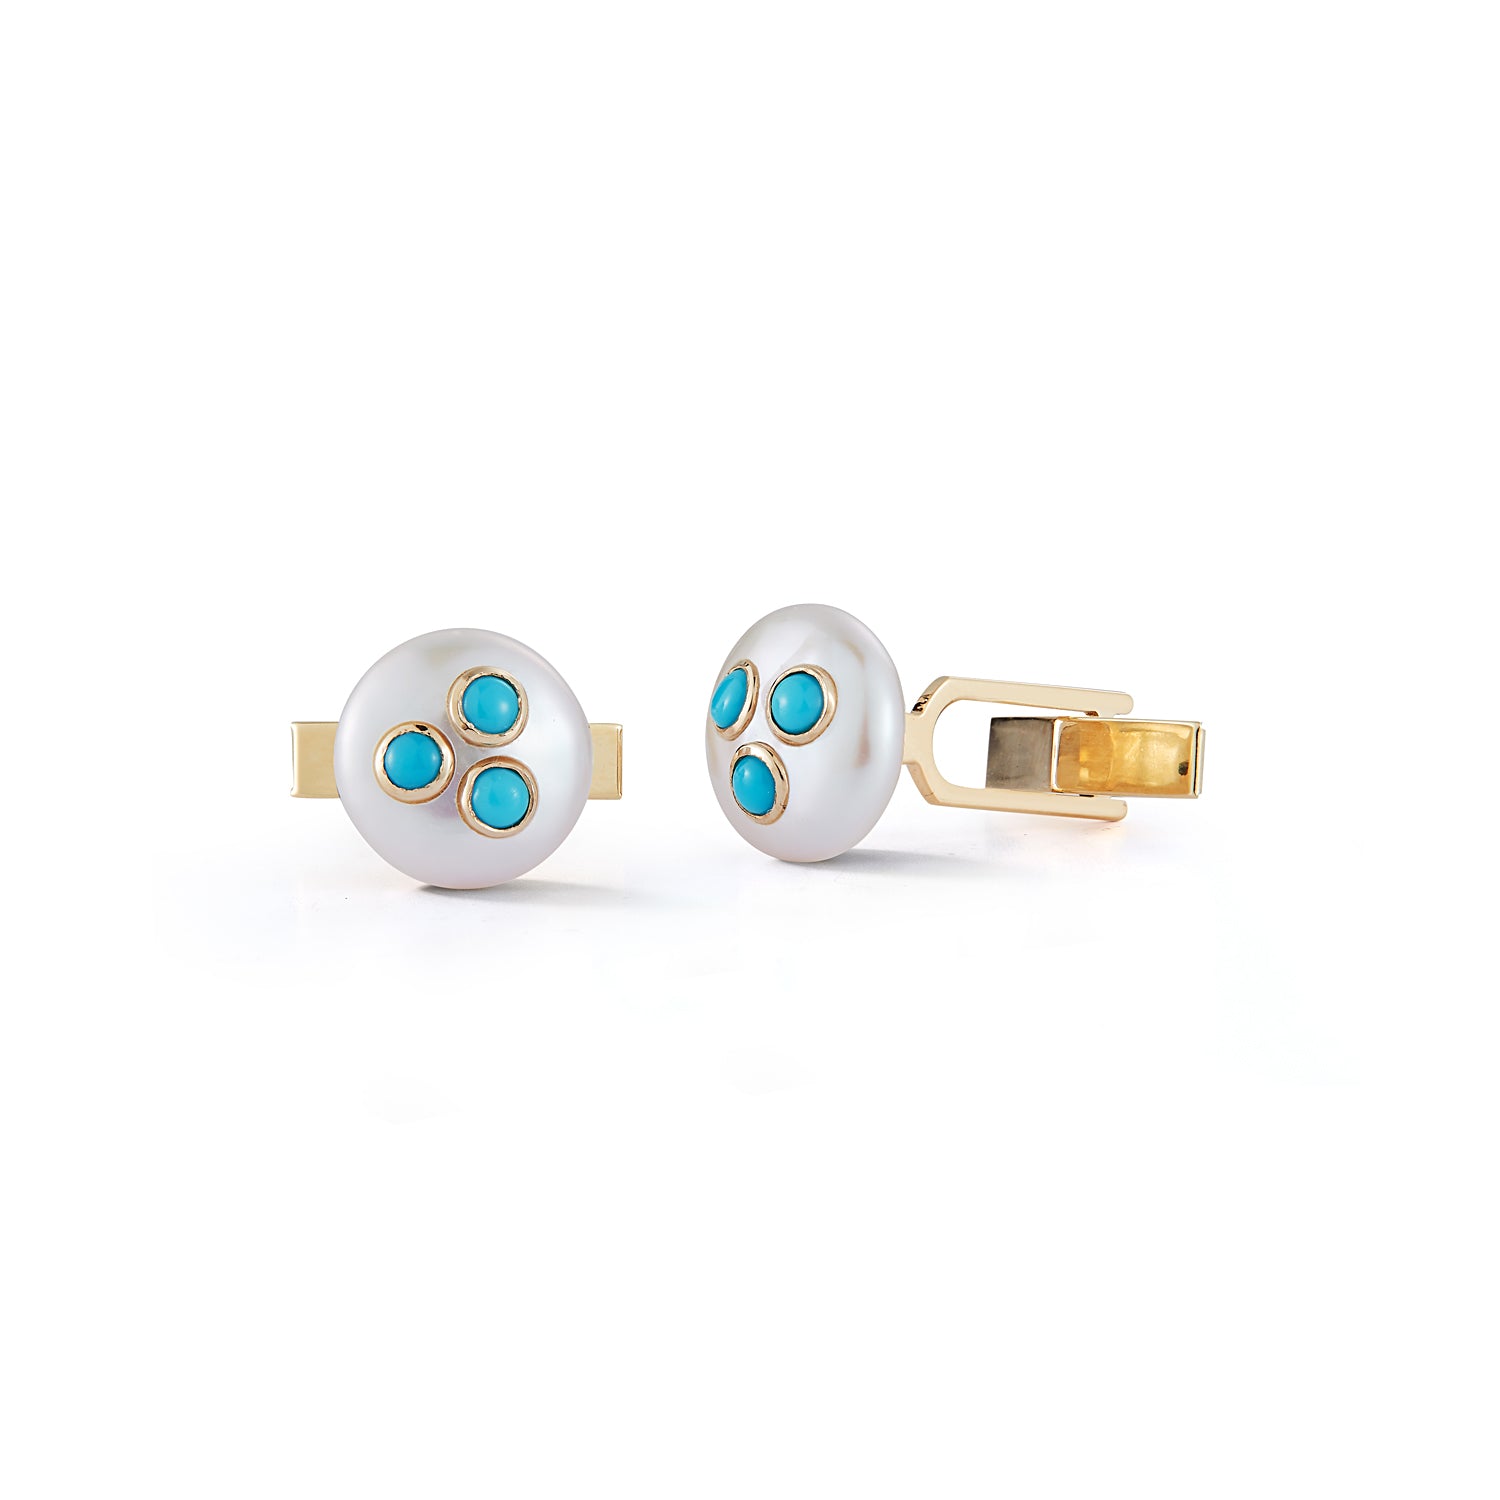 Les Perles Turquoise Cuff Links